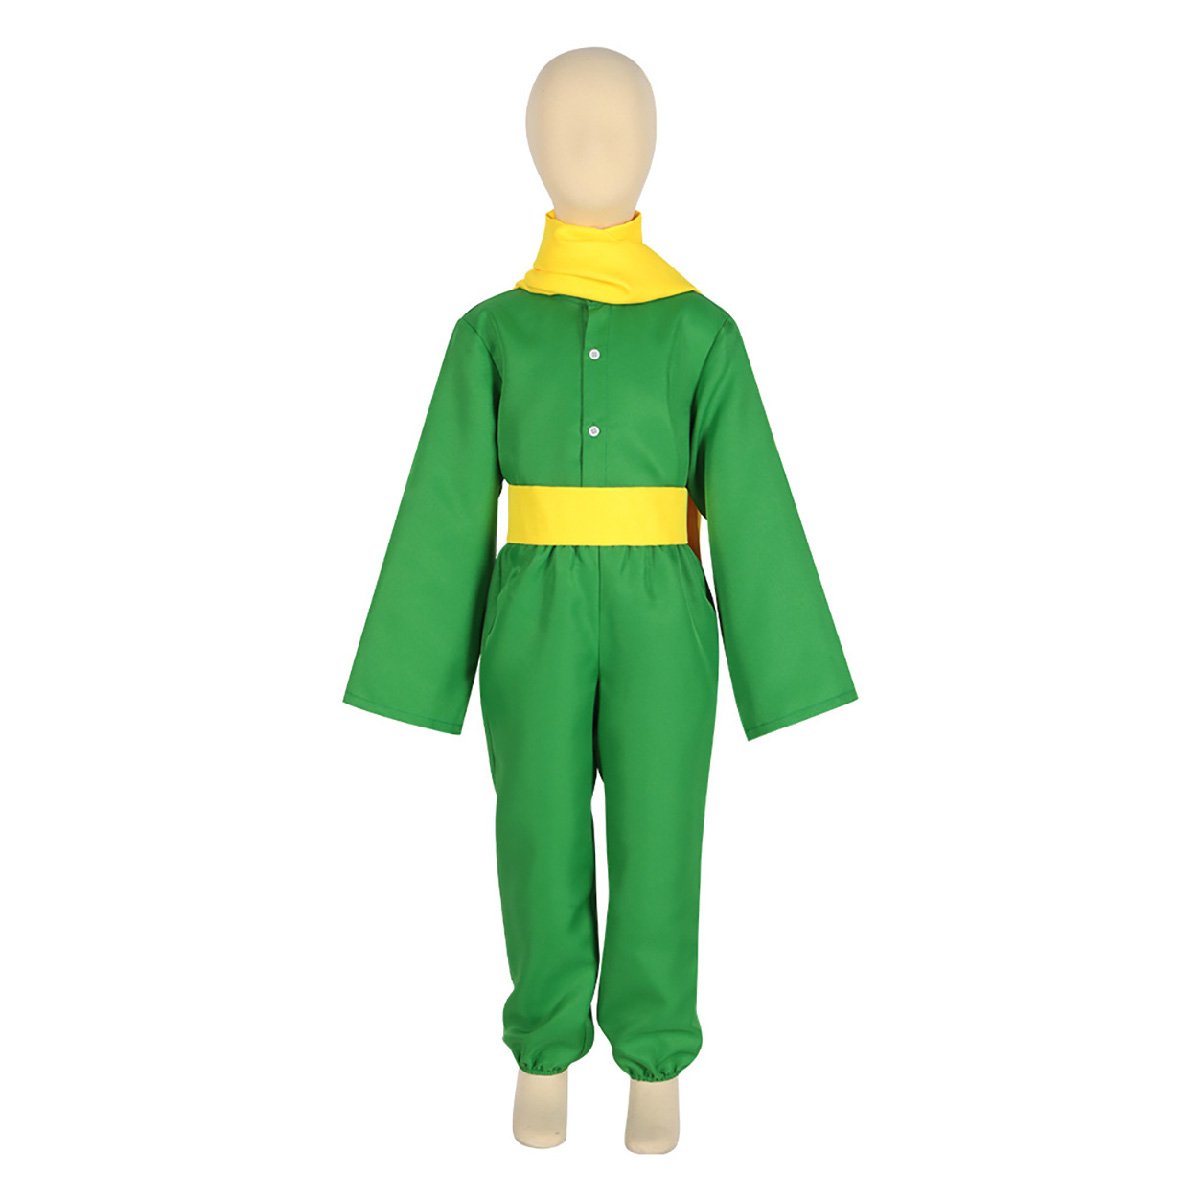 The Little Prince Cosplay Costume